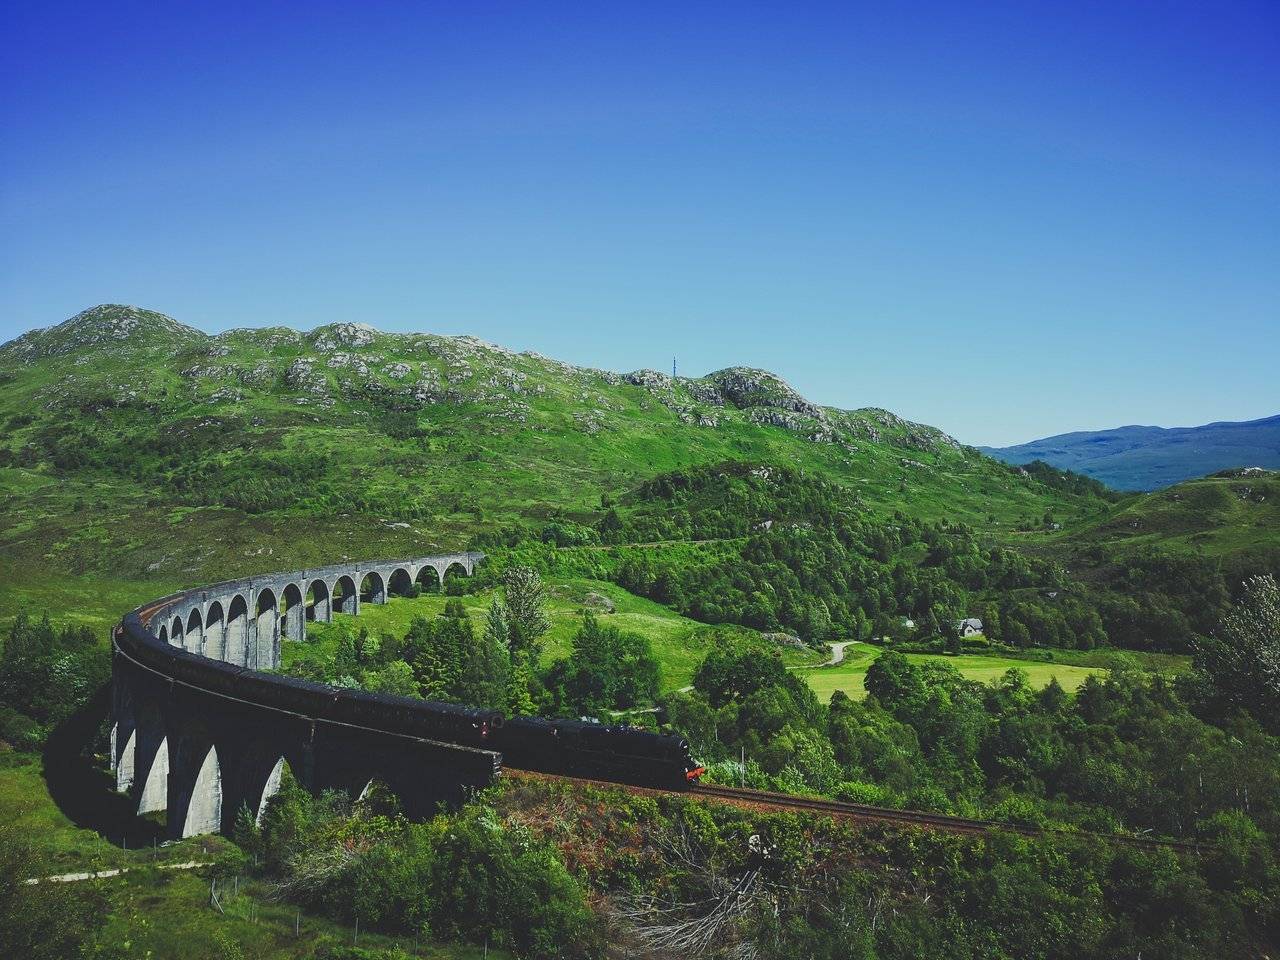   Though you might need to wait for a while, the whole experience of magical Jacobite train will pass by pretty fast. Photo by Alis Monte [CC BY-SA 4.0], via Connecting the Dots